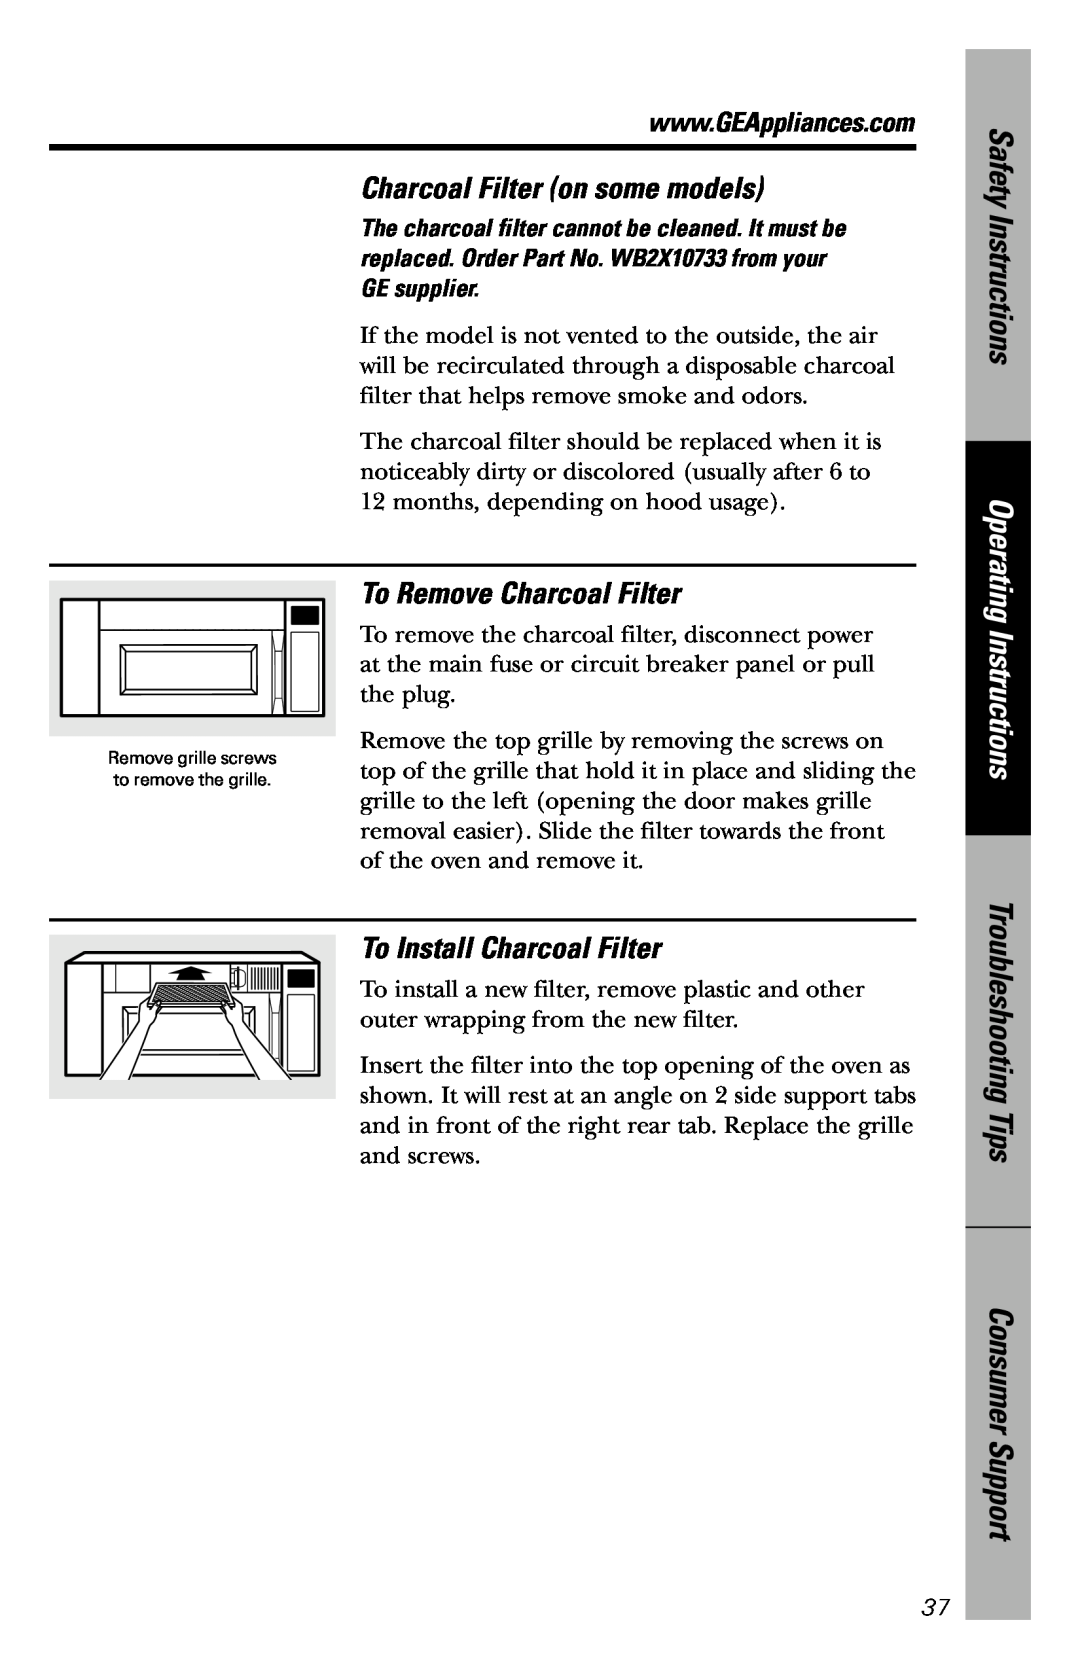 GE JVM3660CD Safety Instructions, Troubleshooting Tips, Charcoal Filter on some models, To Remove Charcoal Filter 